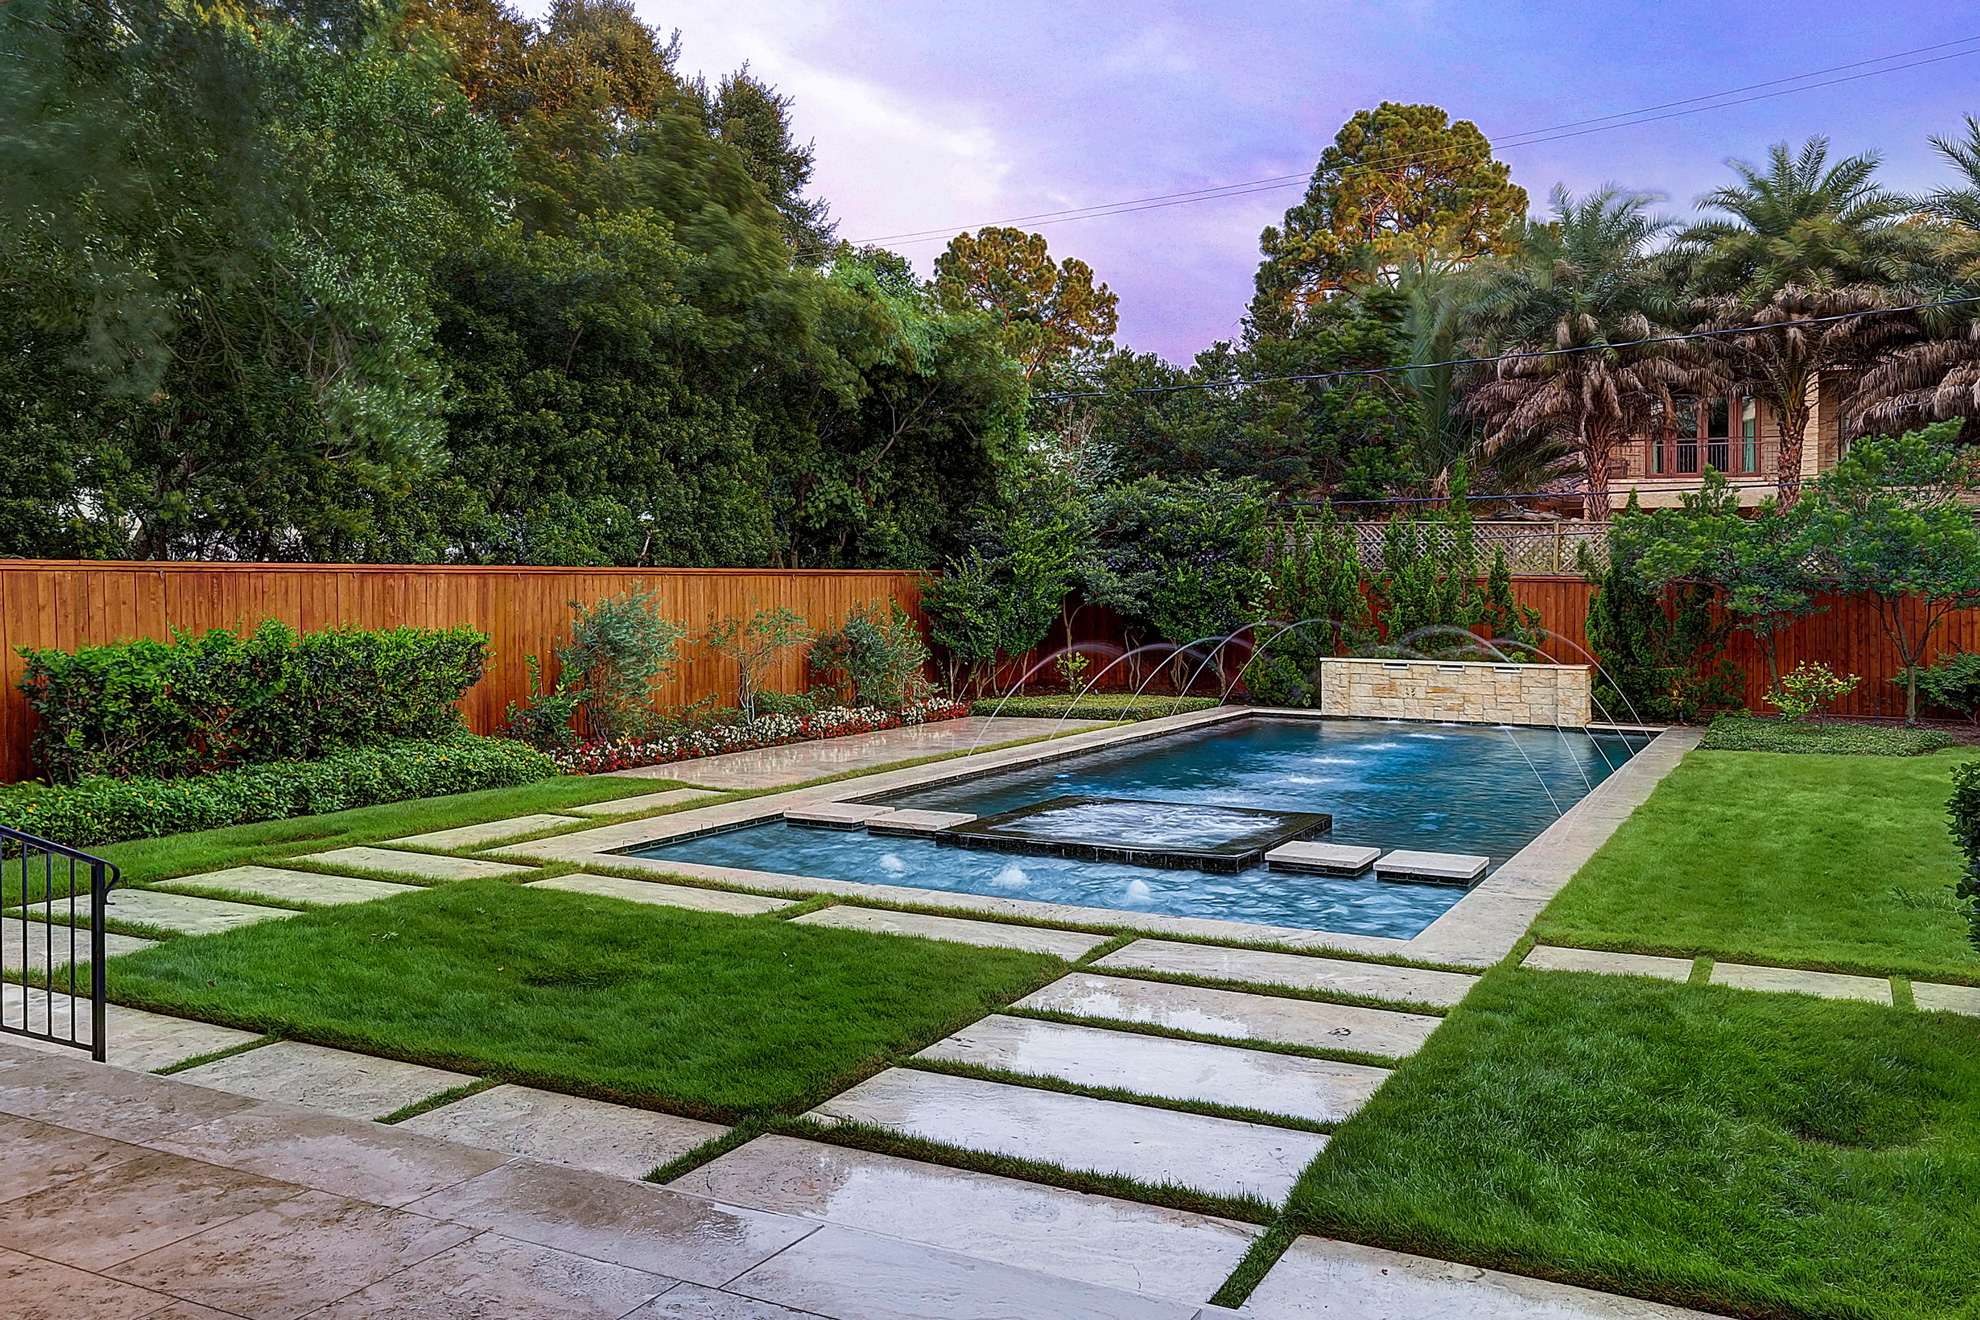 Star Pools - Real-Estate Photography - TK Images